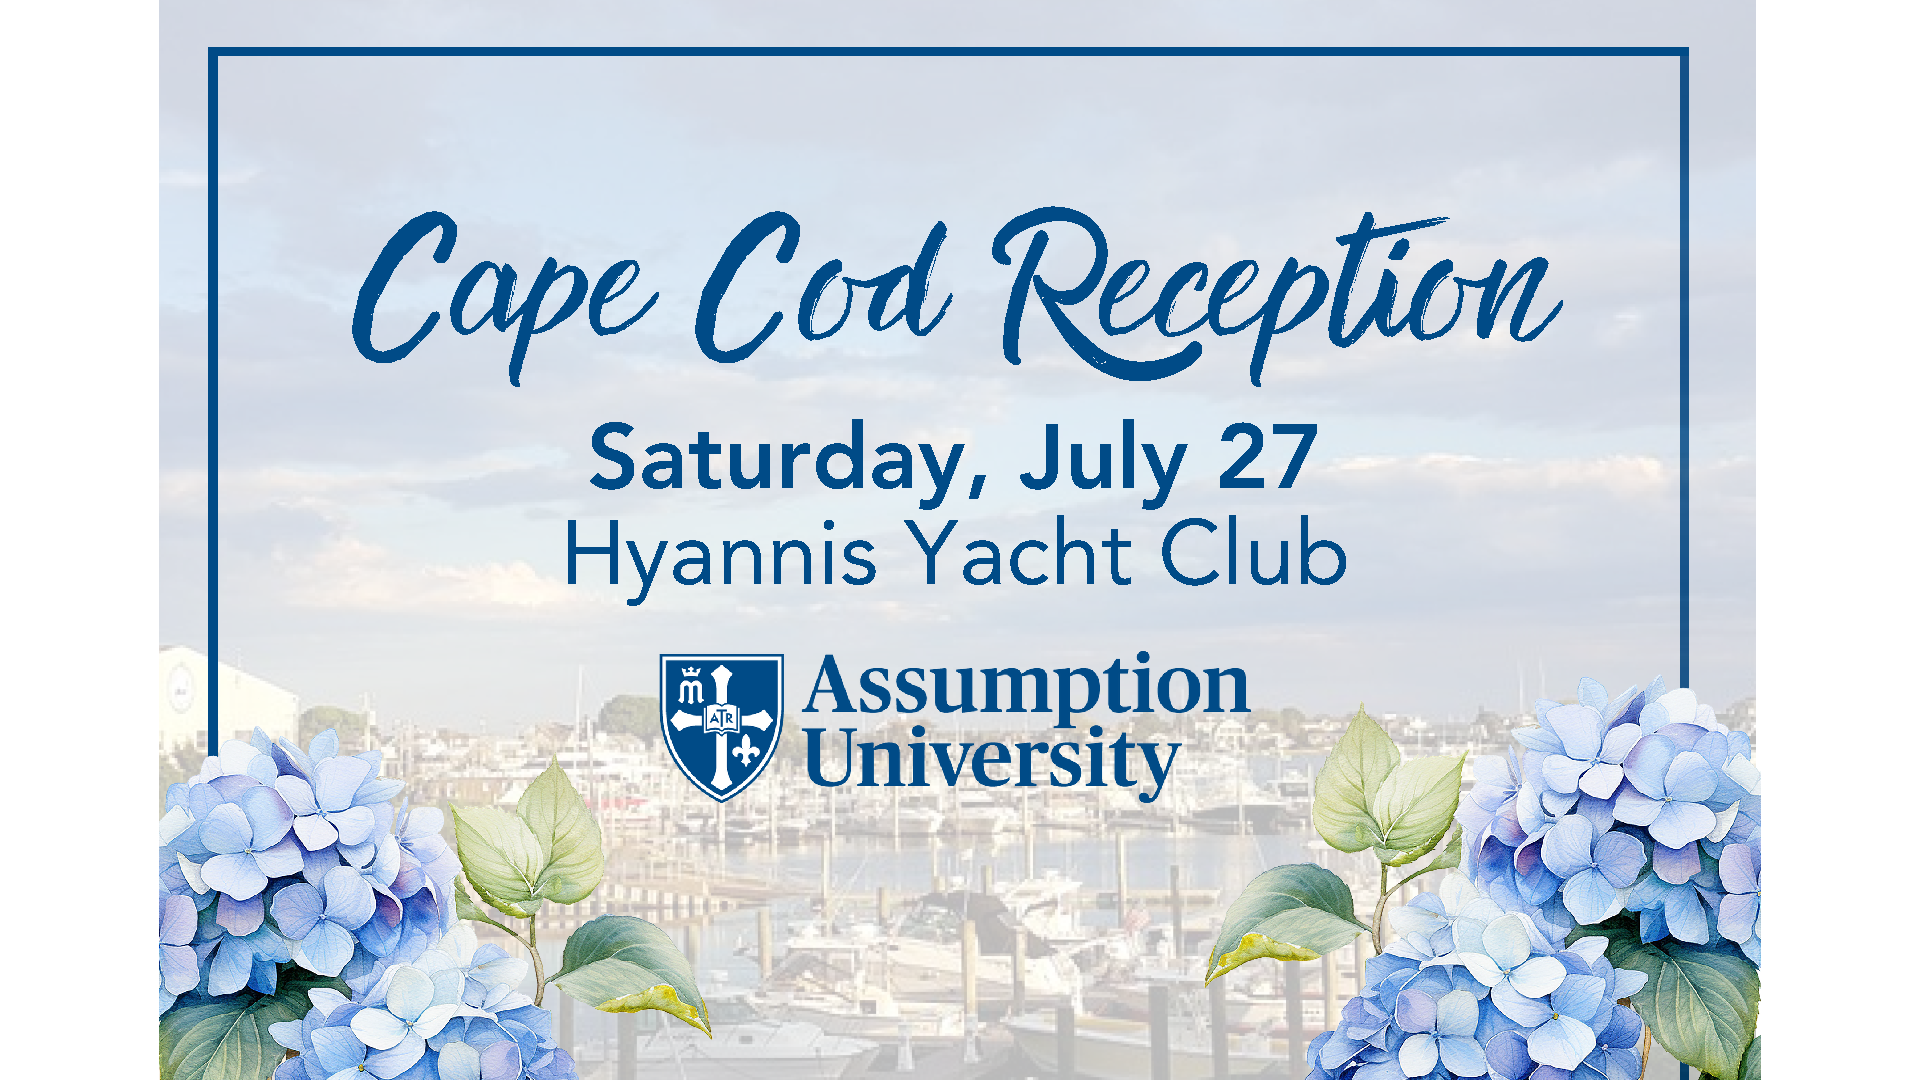 JOIN PRESIDENT GREG WEINER, PH.D, ALUMNI, AND FRIENDS FOR OUR ANNUAL CAPE COD RECEPTION Saturday, July 27 2:00 - 5:00pm Hyannis Yacht Club - The Captain’s Table 490 Ocean Street Hyannis, MA Complimentary hors d’oeuvres, beverages, and parking